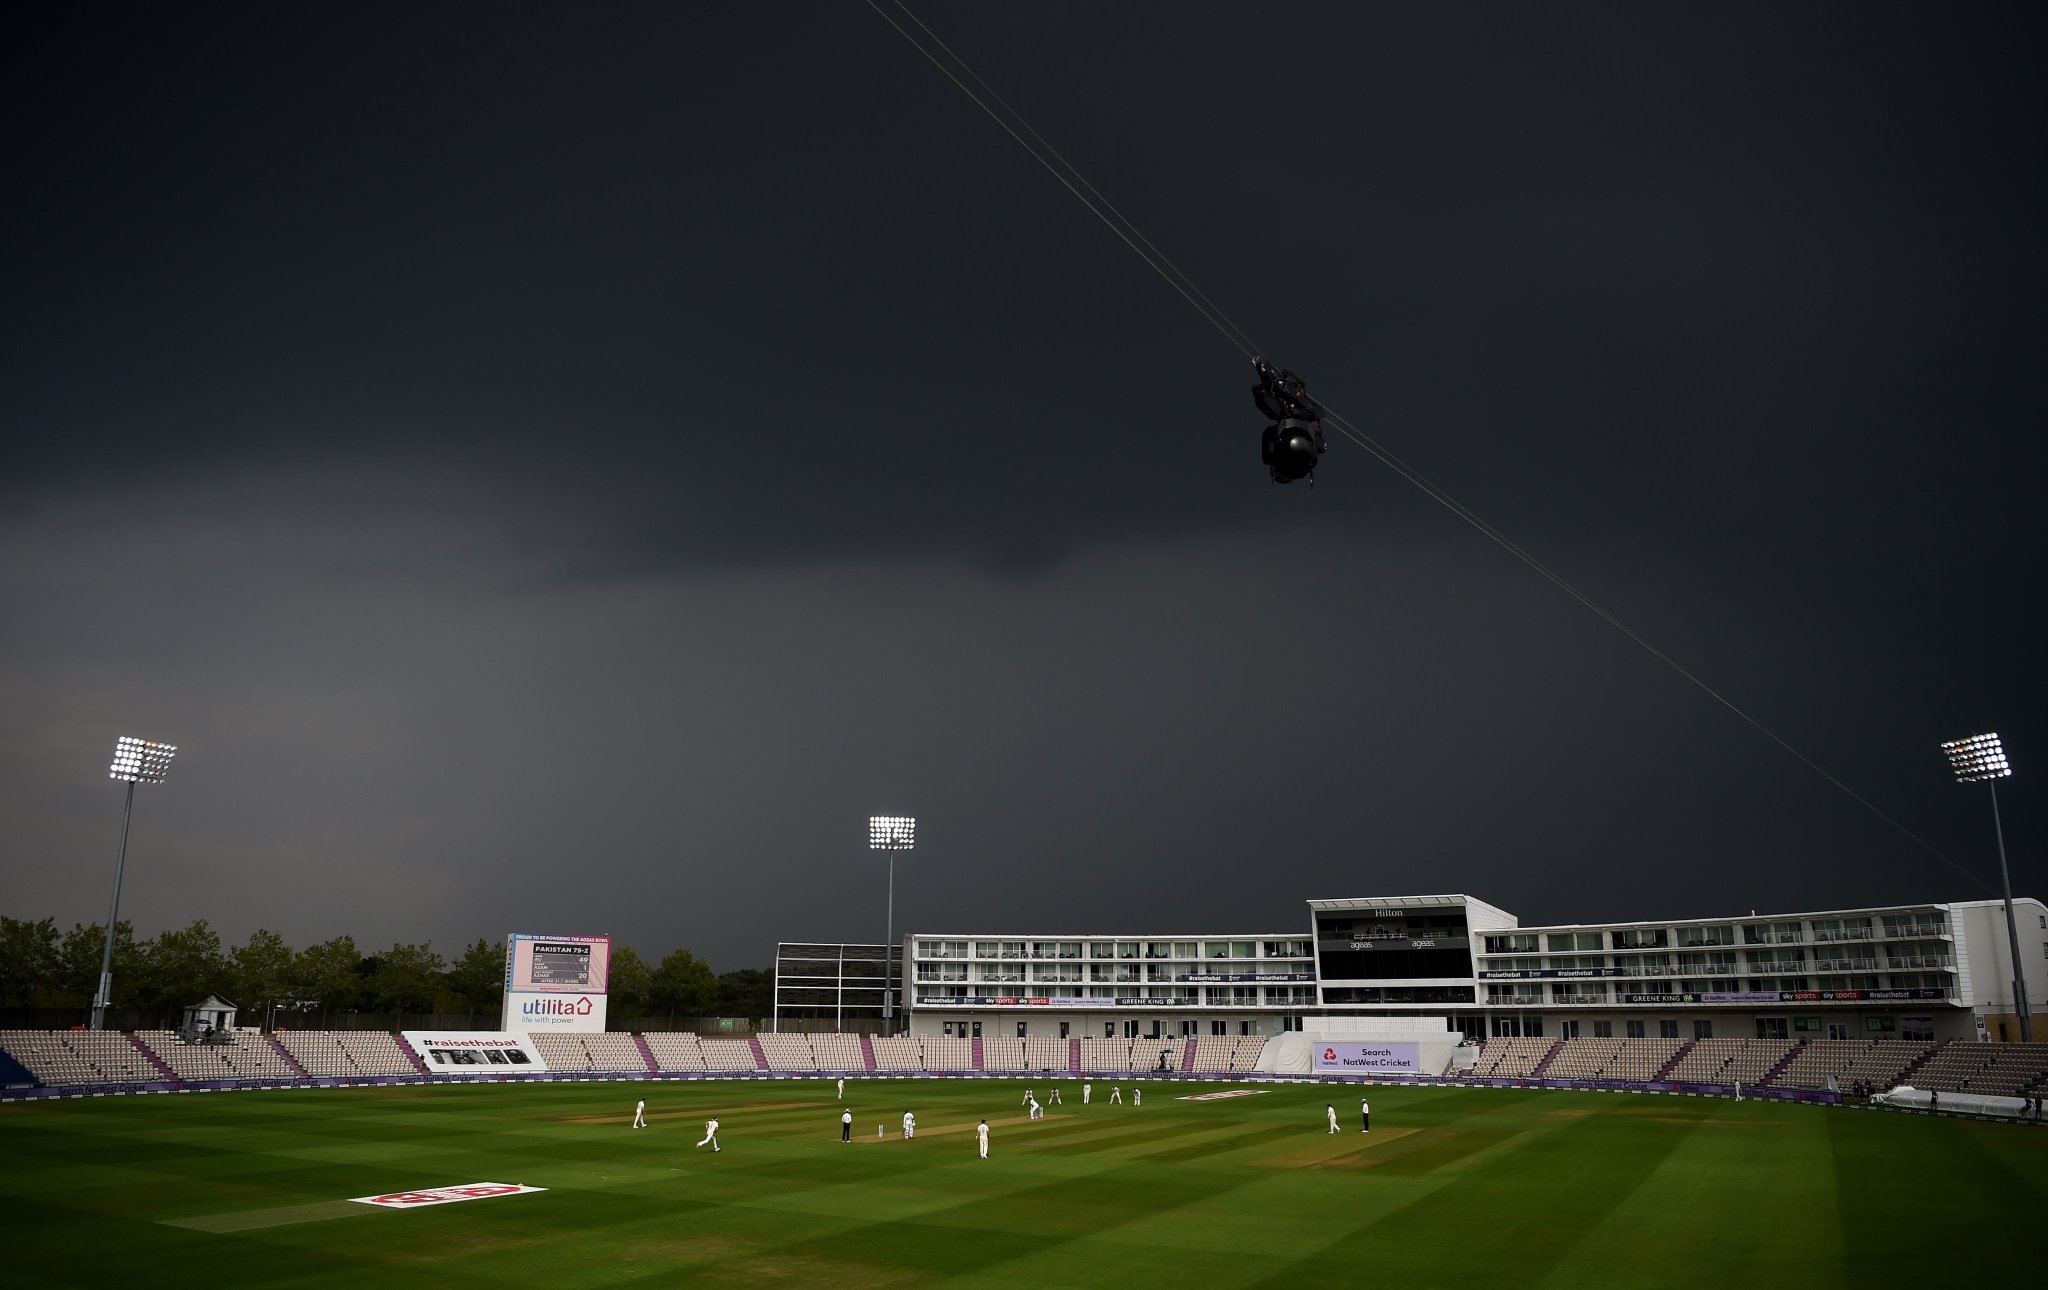 Twitter reacts to England reducing Pakistan to 126-5 as rain prevails